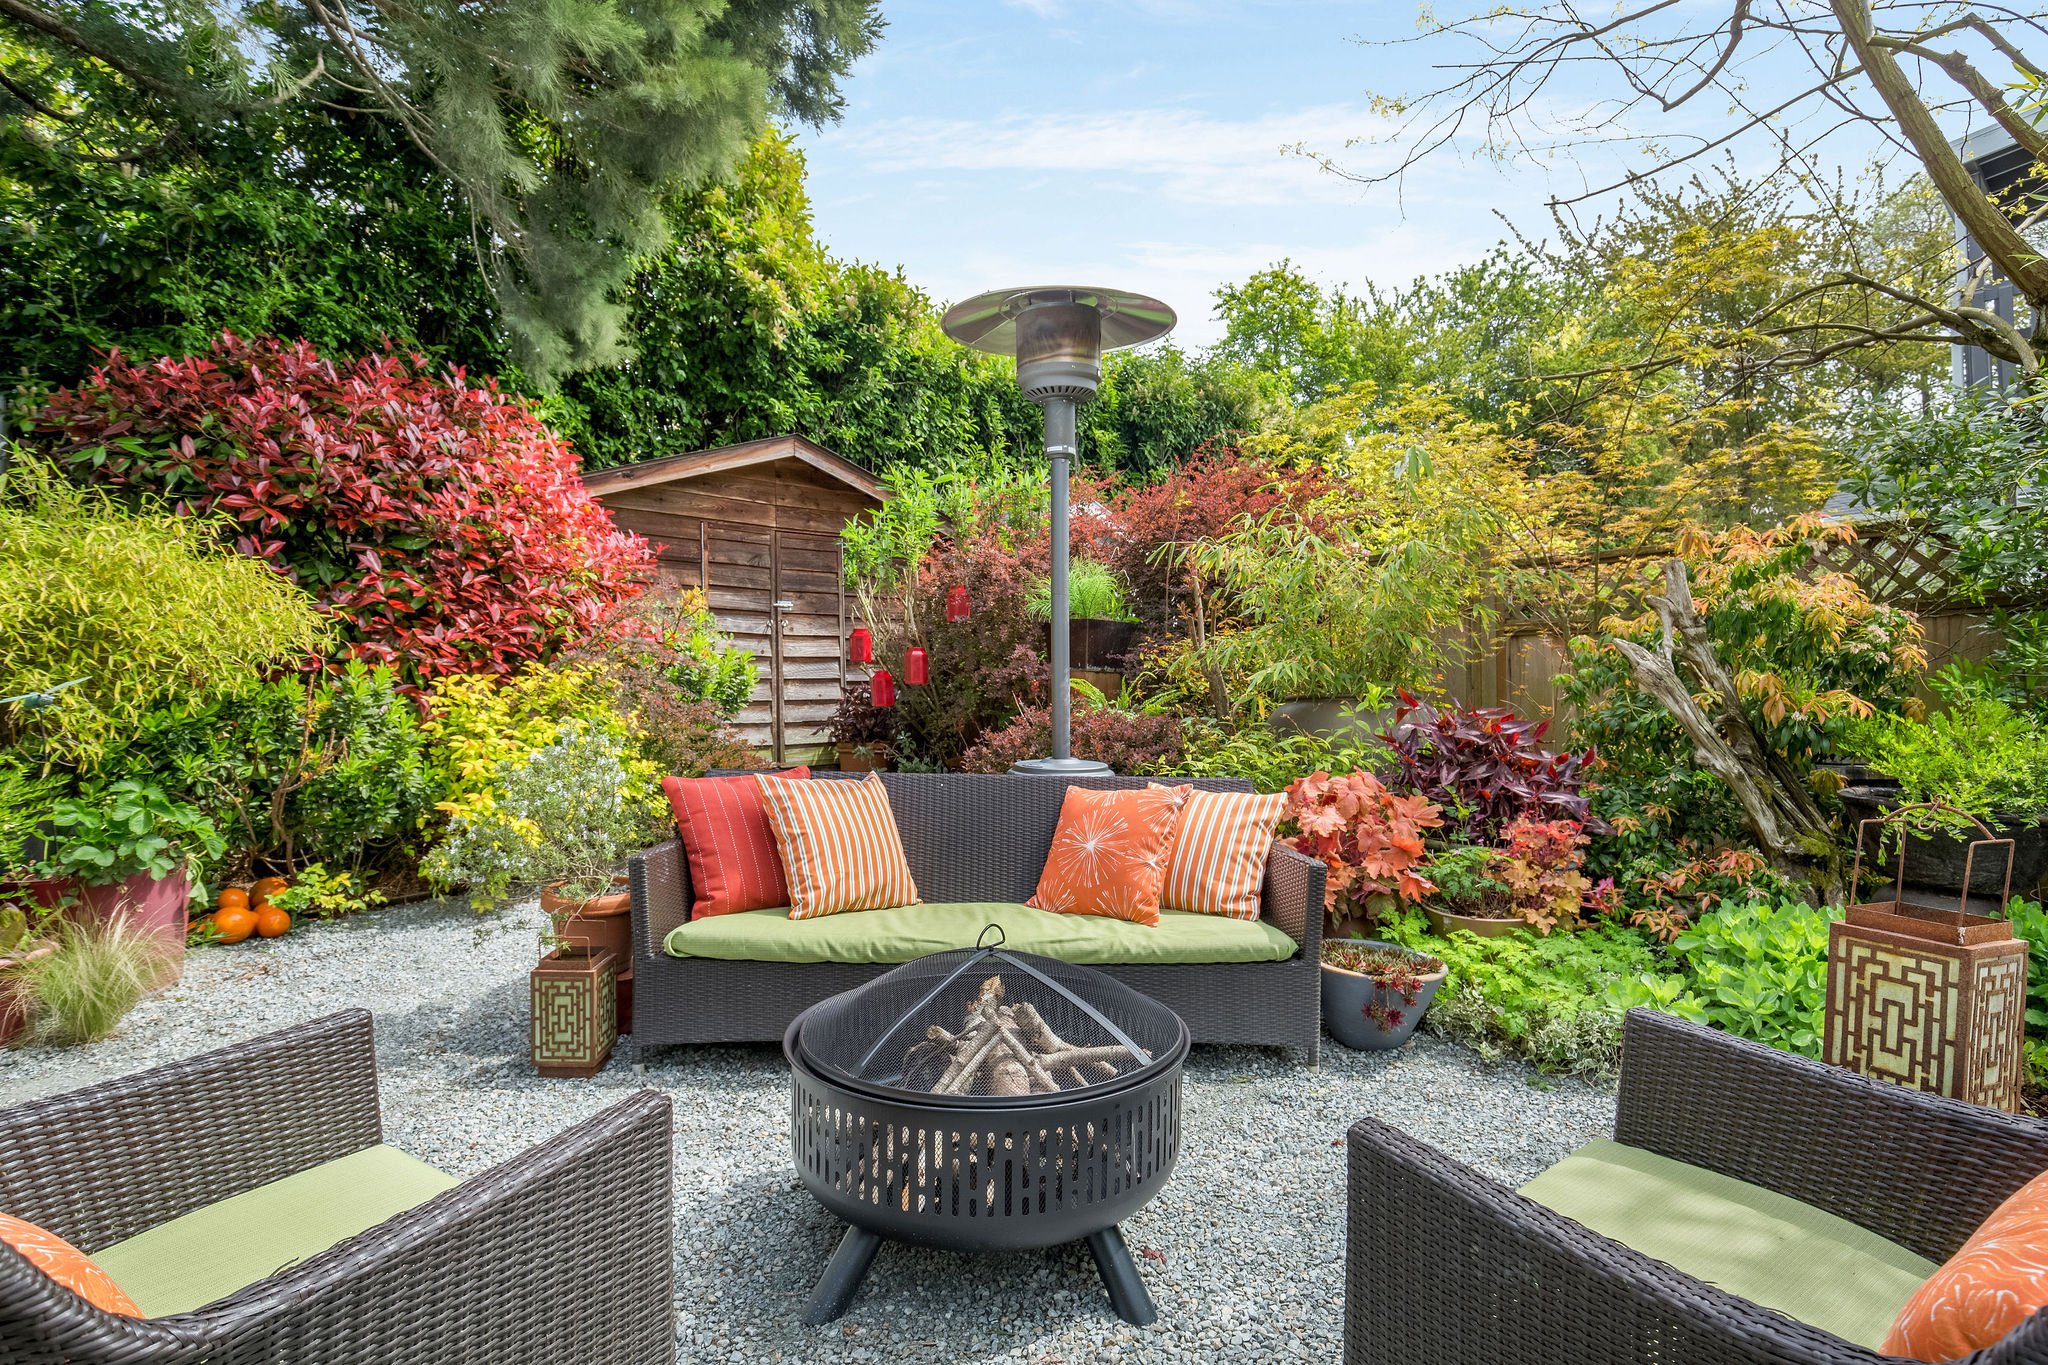  image description: exterior of patio with fire pit and patio furniture 